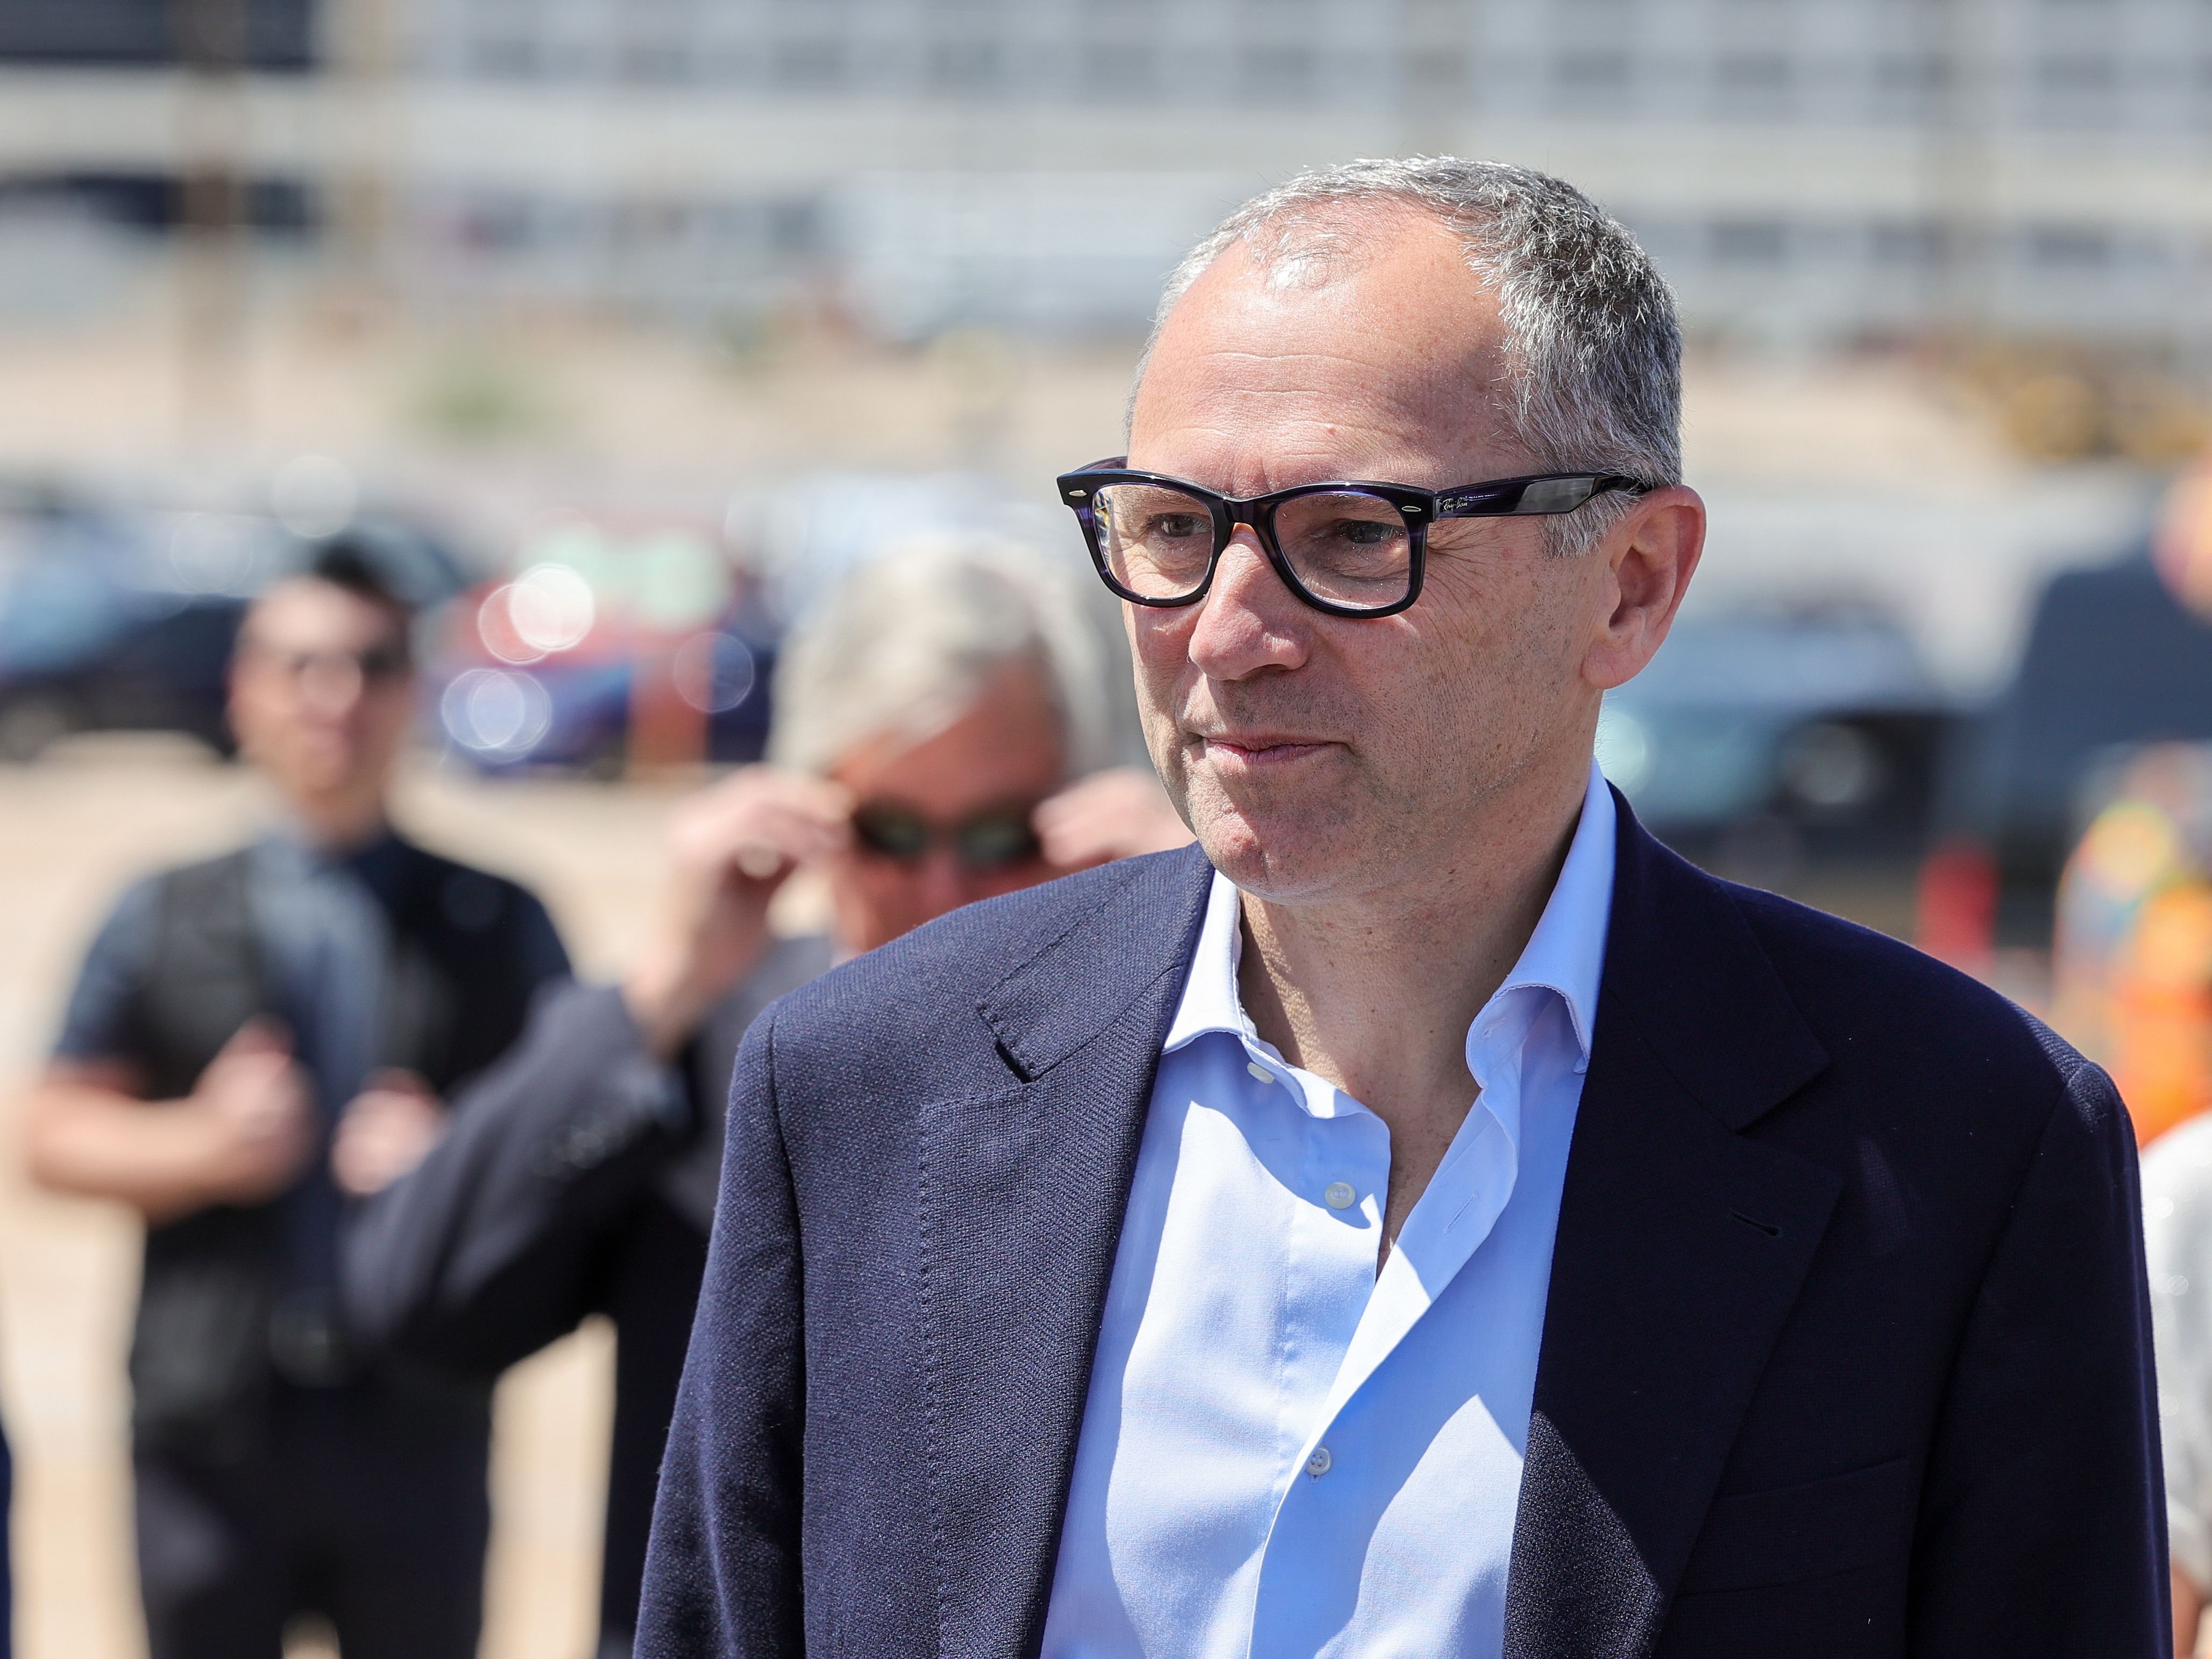 Stefano Domenicali arrives at a topping out event for the 2023 F1 Las Vegas Grand Prix paddock building (Photo by Ethan Miller/Getty Images)